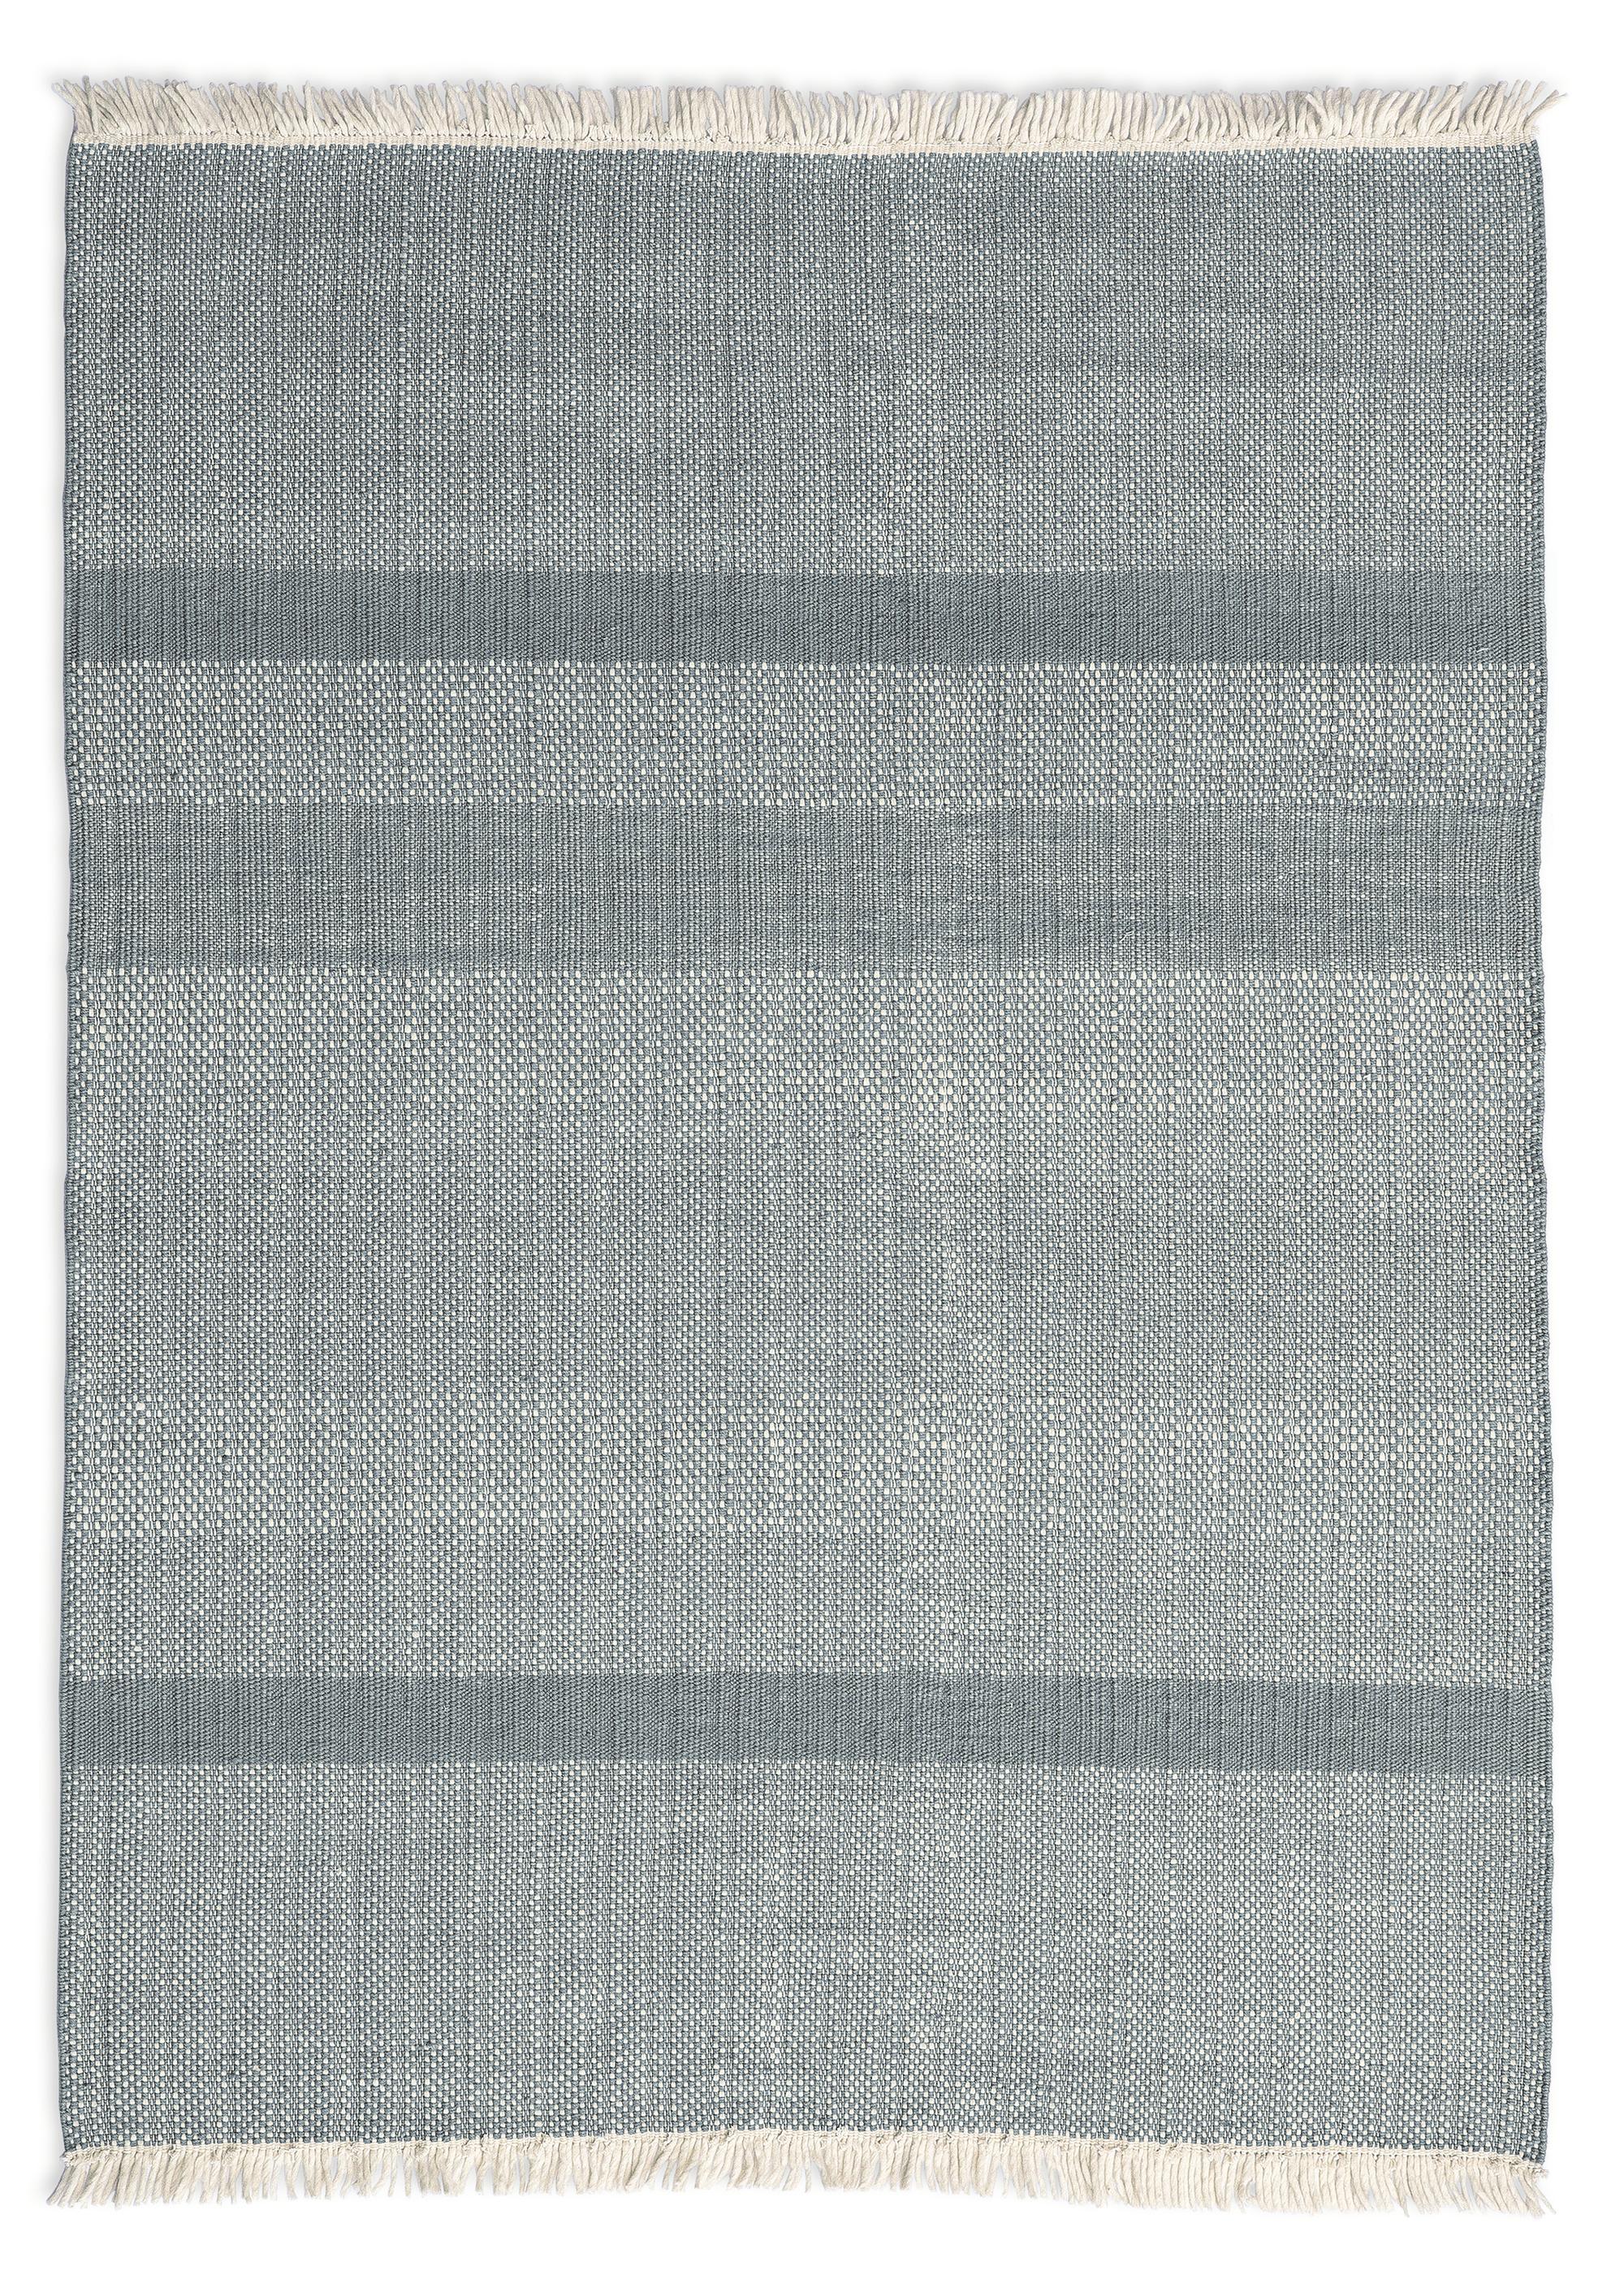 'Tres Texture' Hand-Loomed Rug for Nanimarquina For Sale 4